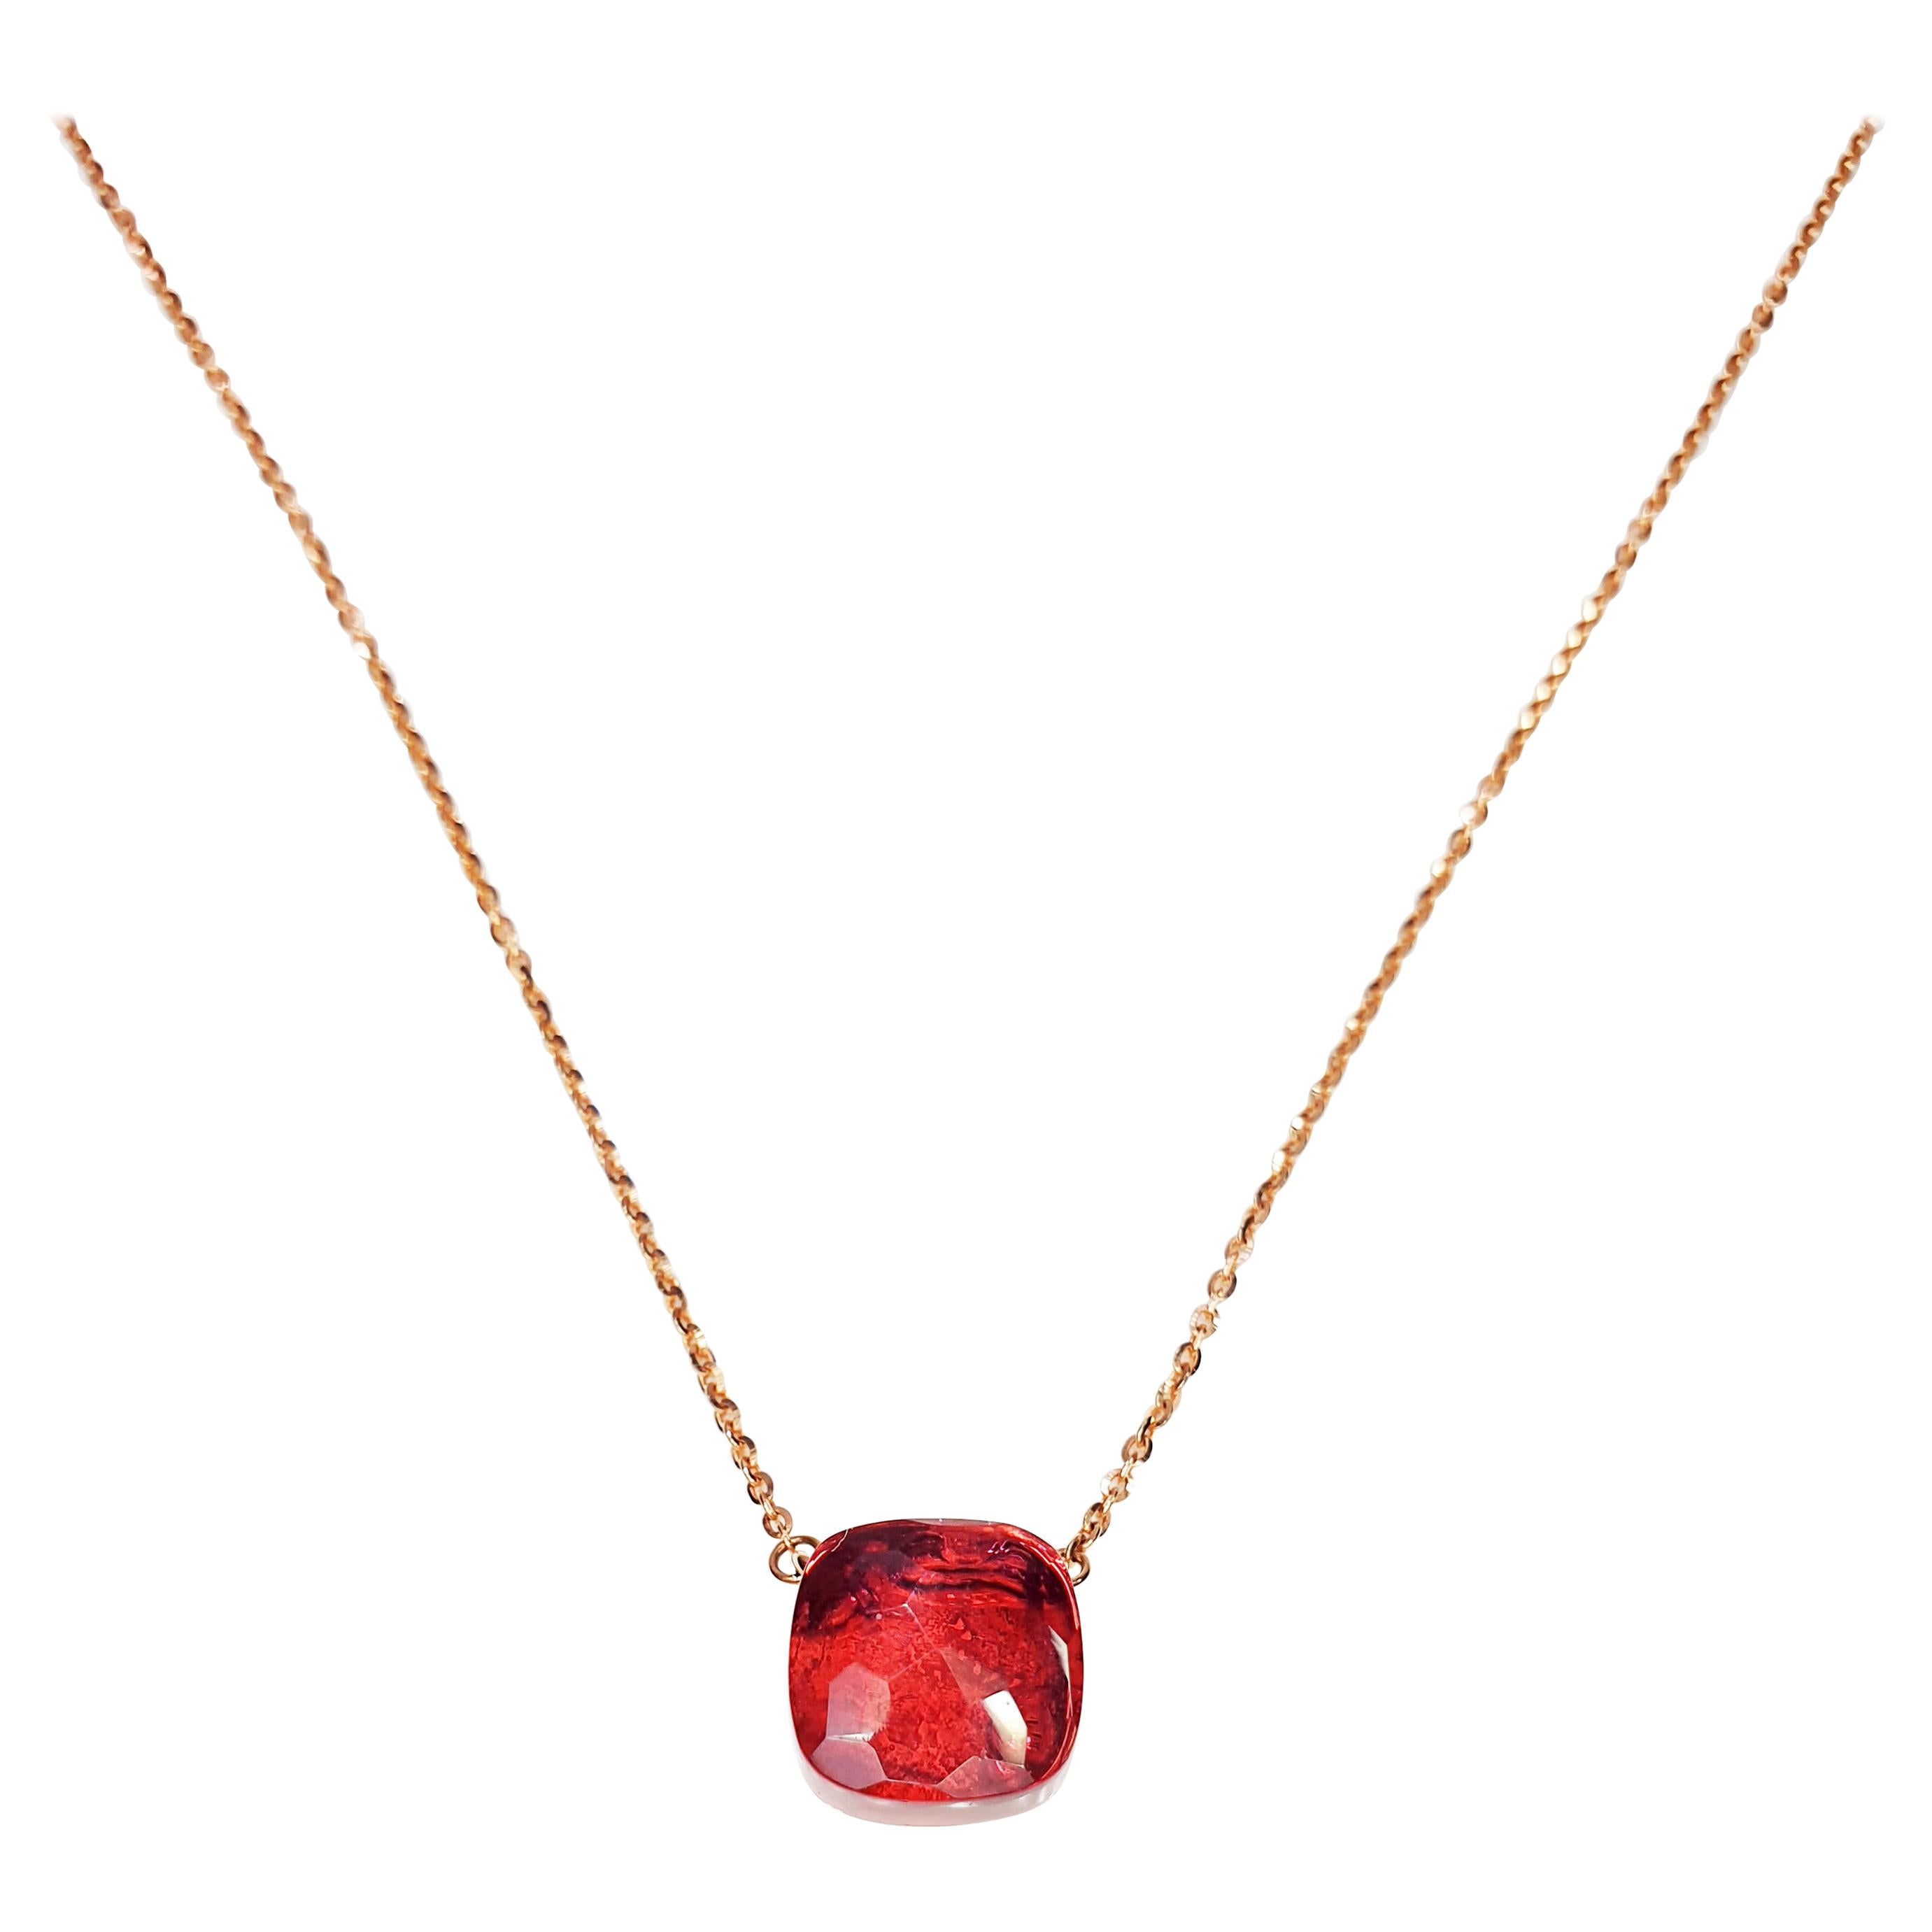 Multifaceted Rouge Quartz Pendant in 18 Karat Yellow Gold Chain For Sale